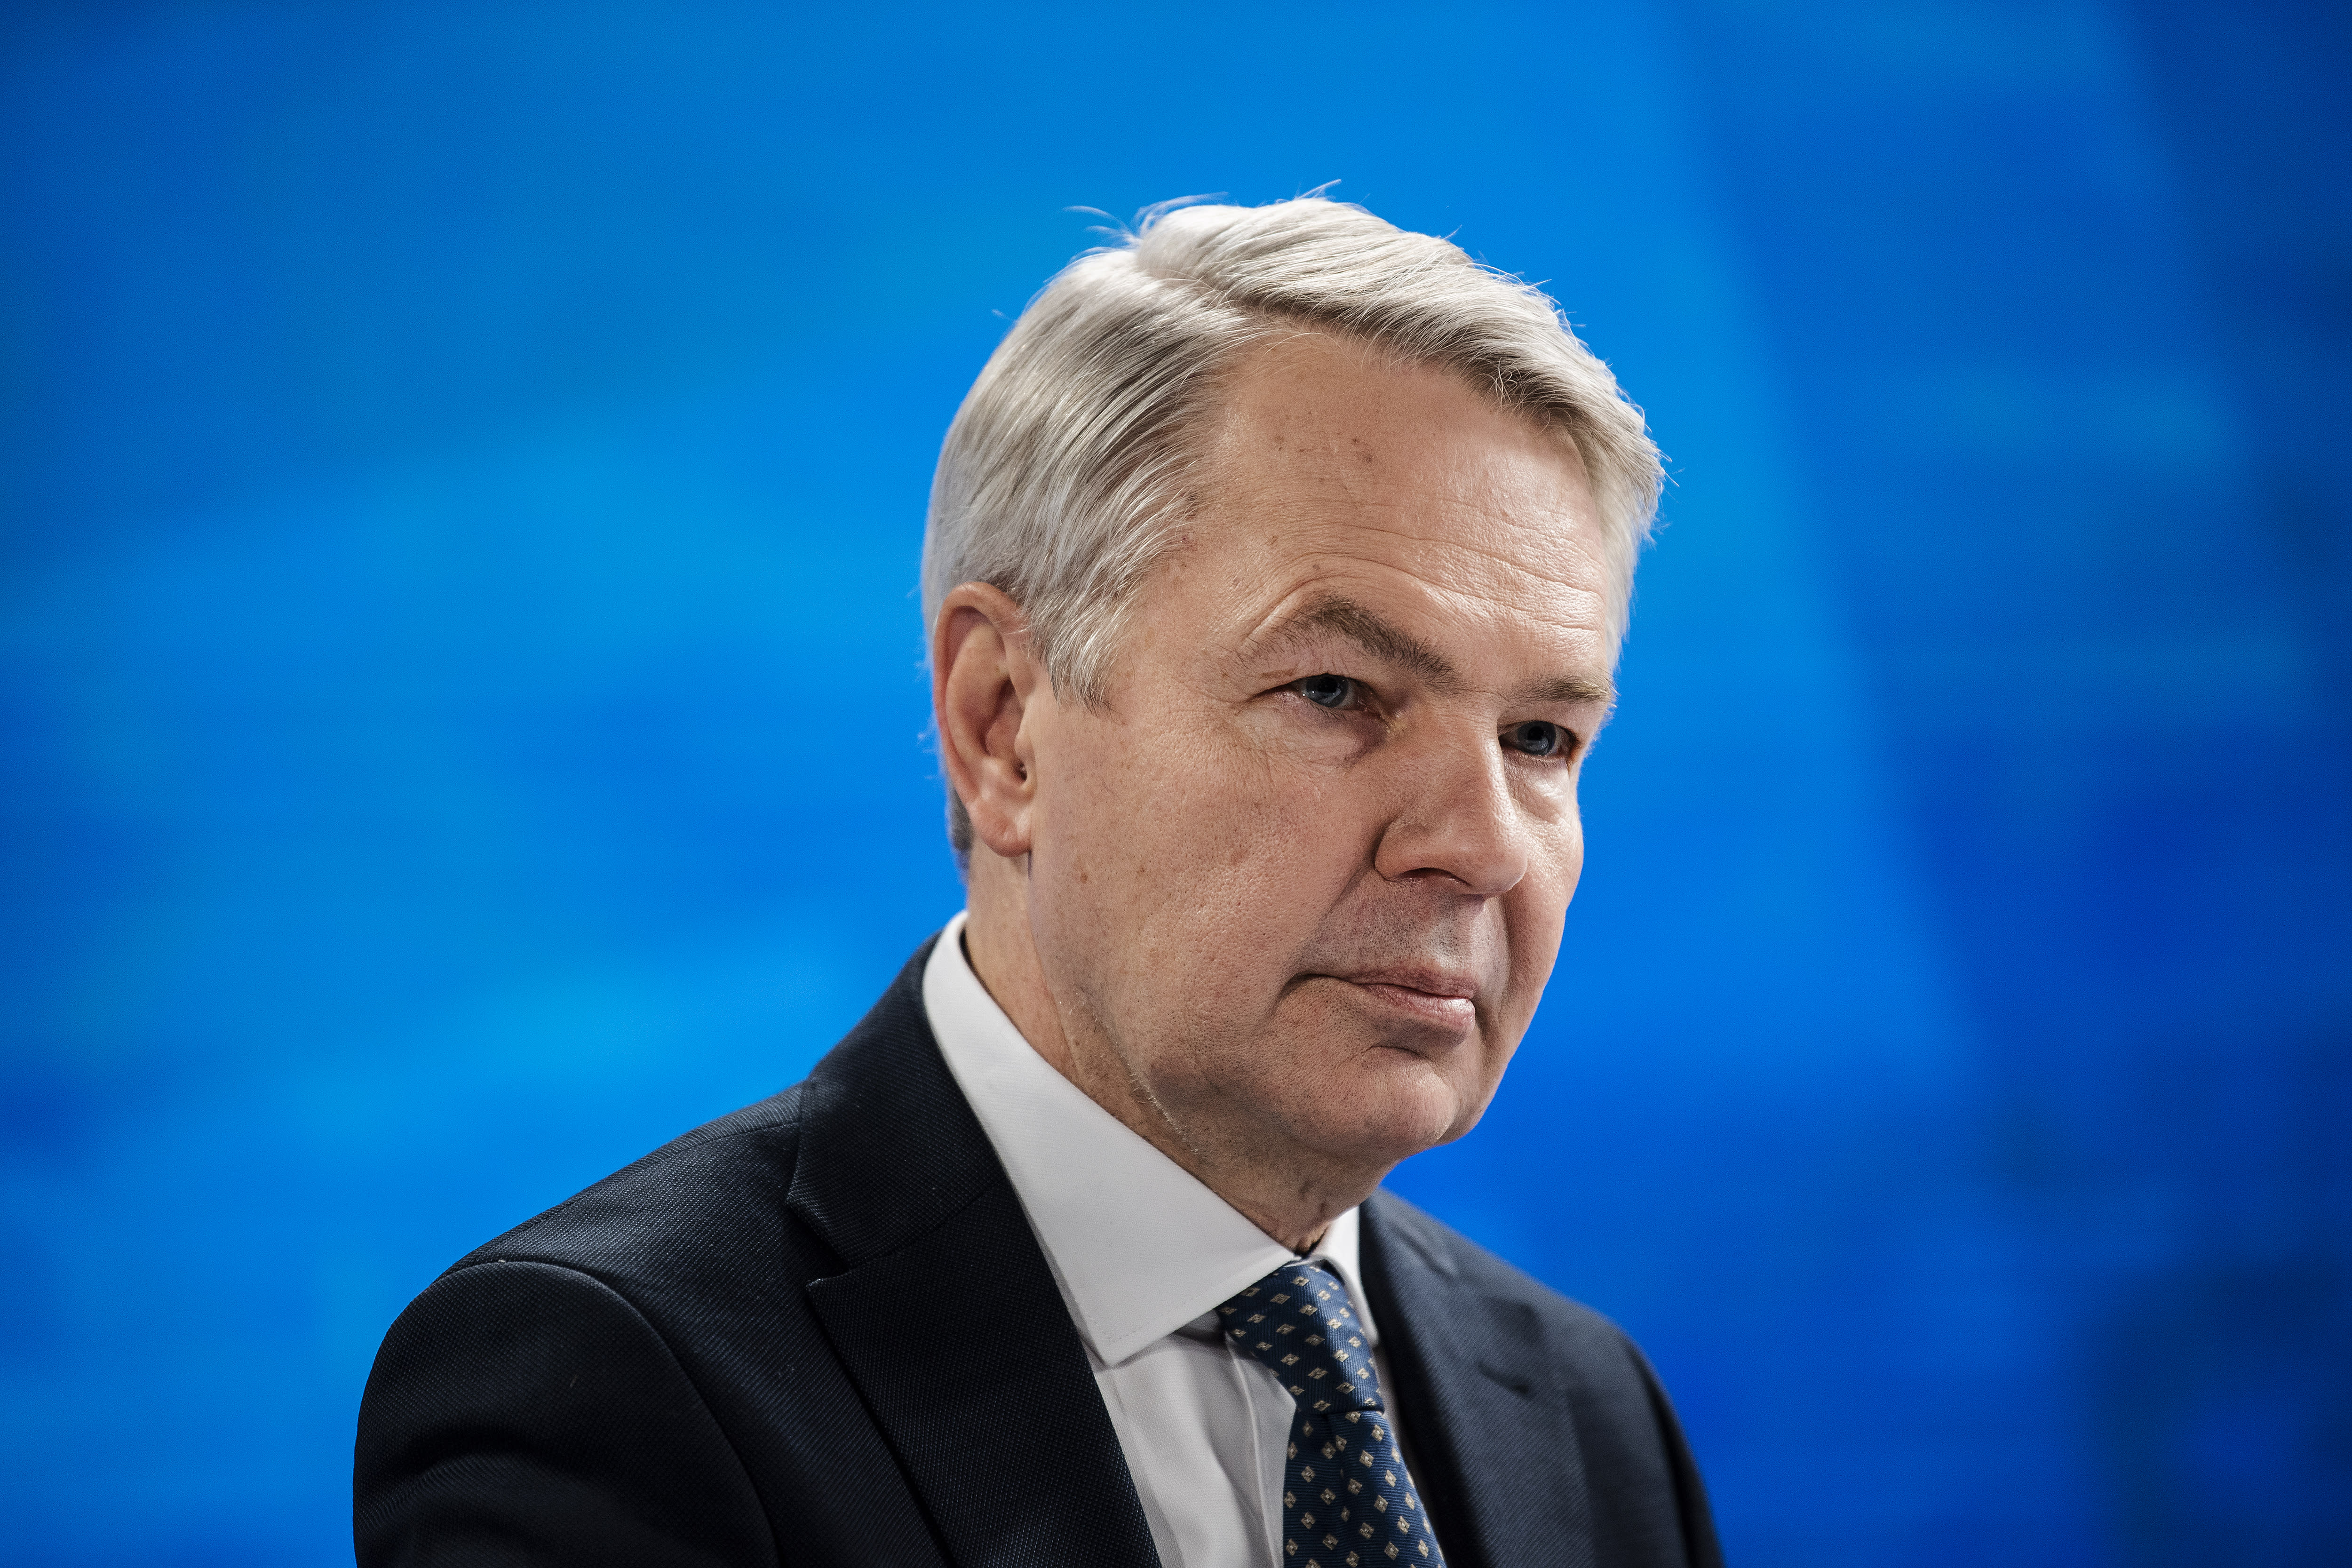 There will be no changes to Finnish legislation from the agreement with Turkey, says Foreign Minister Haavisto